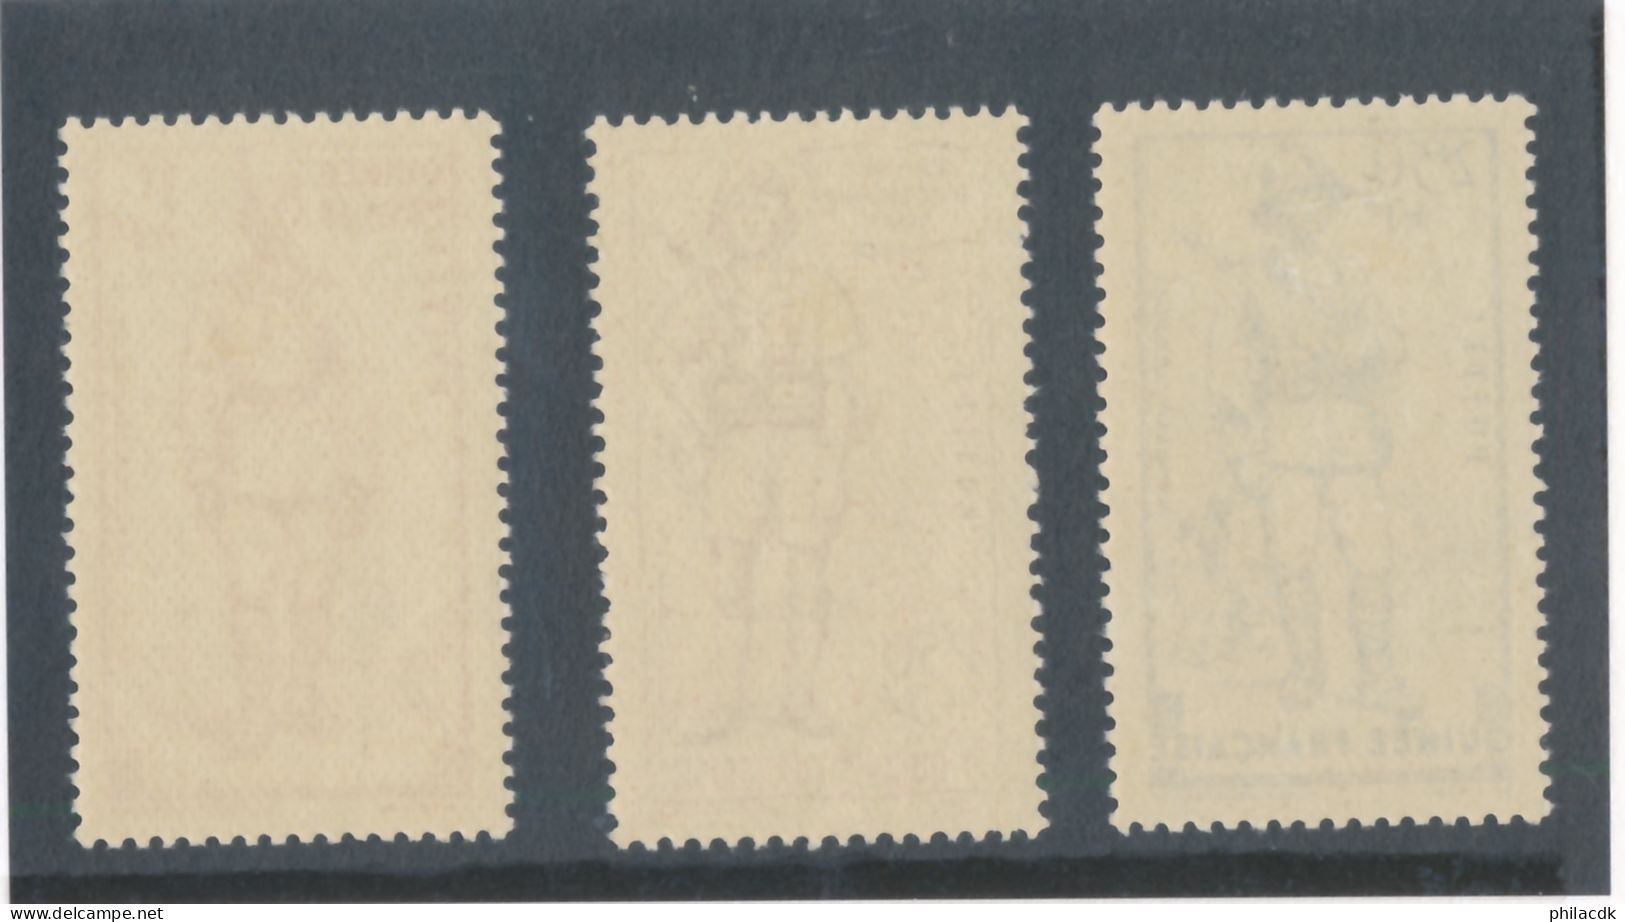 GUINEE - N° 169/71 NEUF* AVEC CHARNIERE - 1941 - Unused Stamps